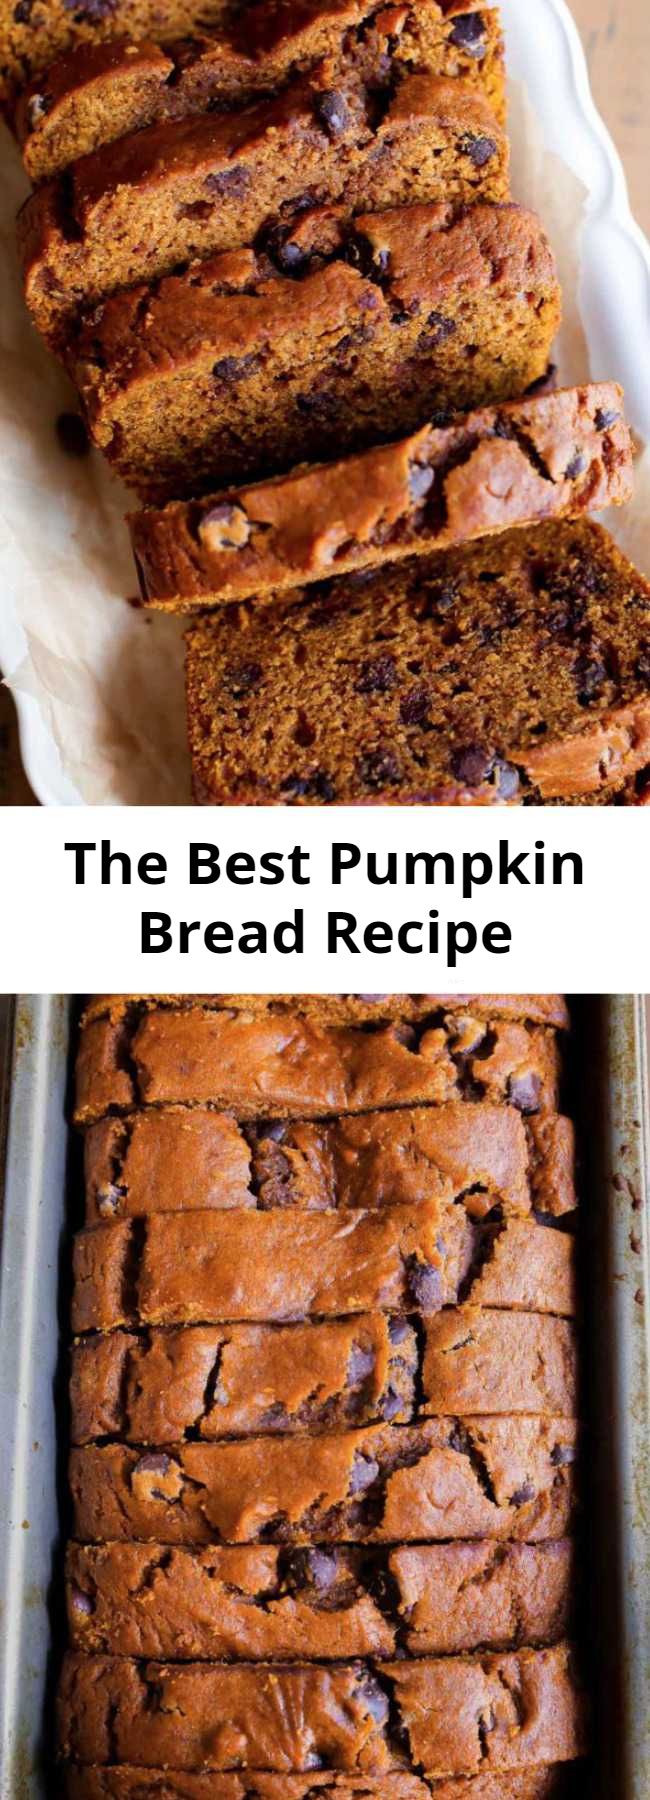 The Best Pumpkin Bread Recipe - Homemade pumpkin bread is a favorite fall recipe packed with sweet cinnamon spice, chocolate chips, and tons of pumpkin flavor. The days of bland pumpkin bread are behind us!